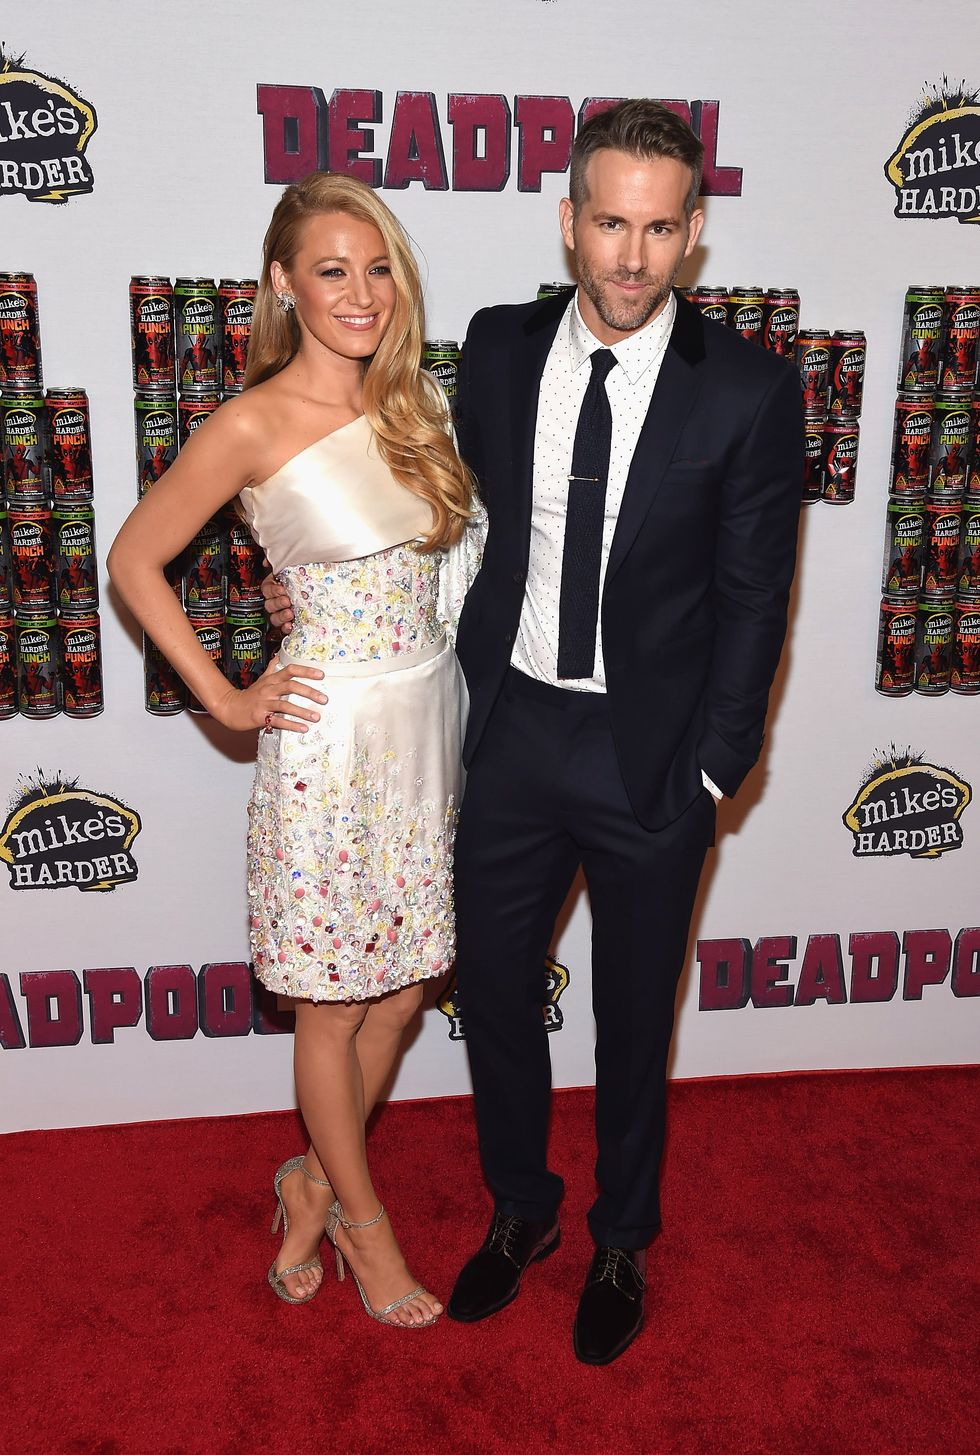 blake lively and ryan reynolds at 'deadpool' event